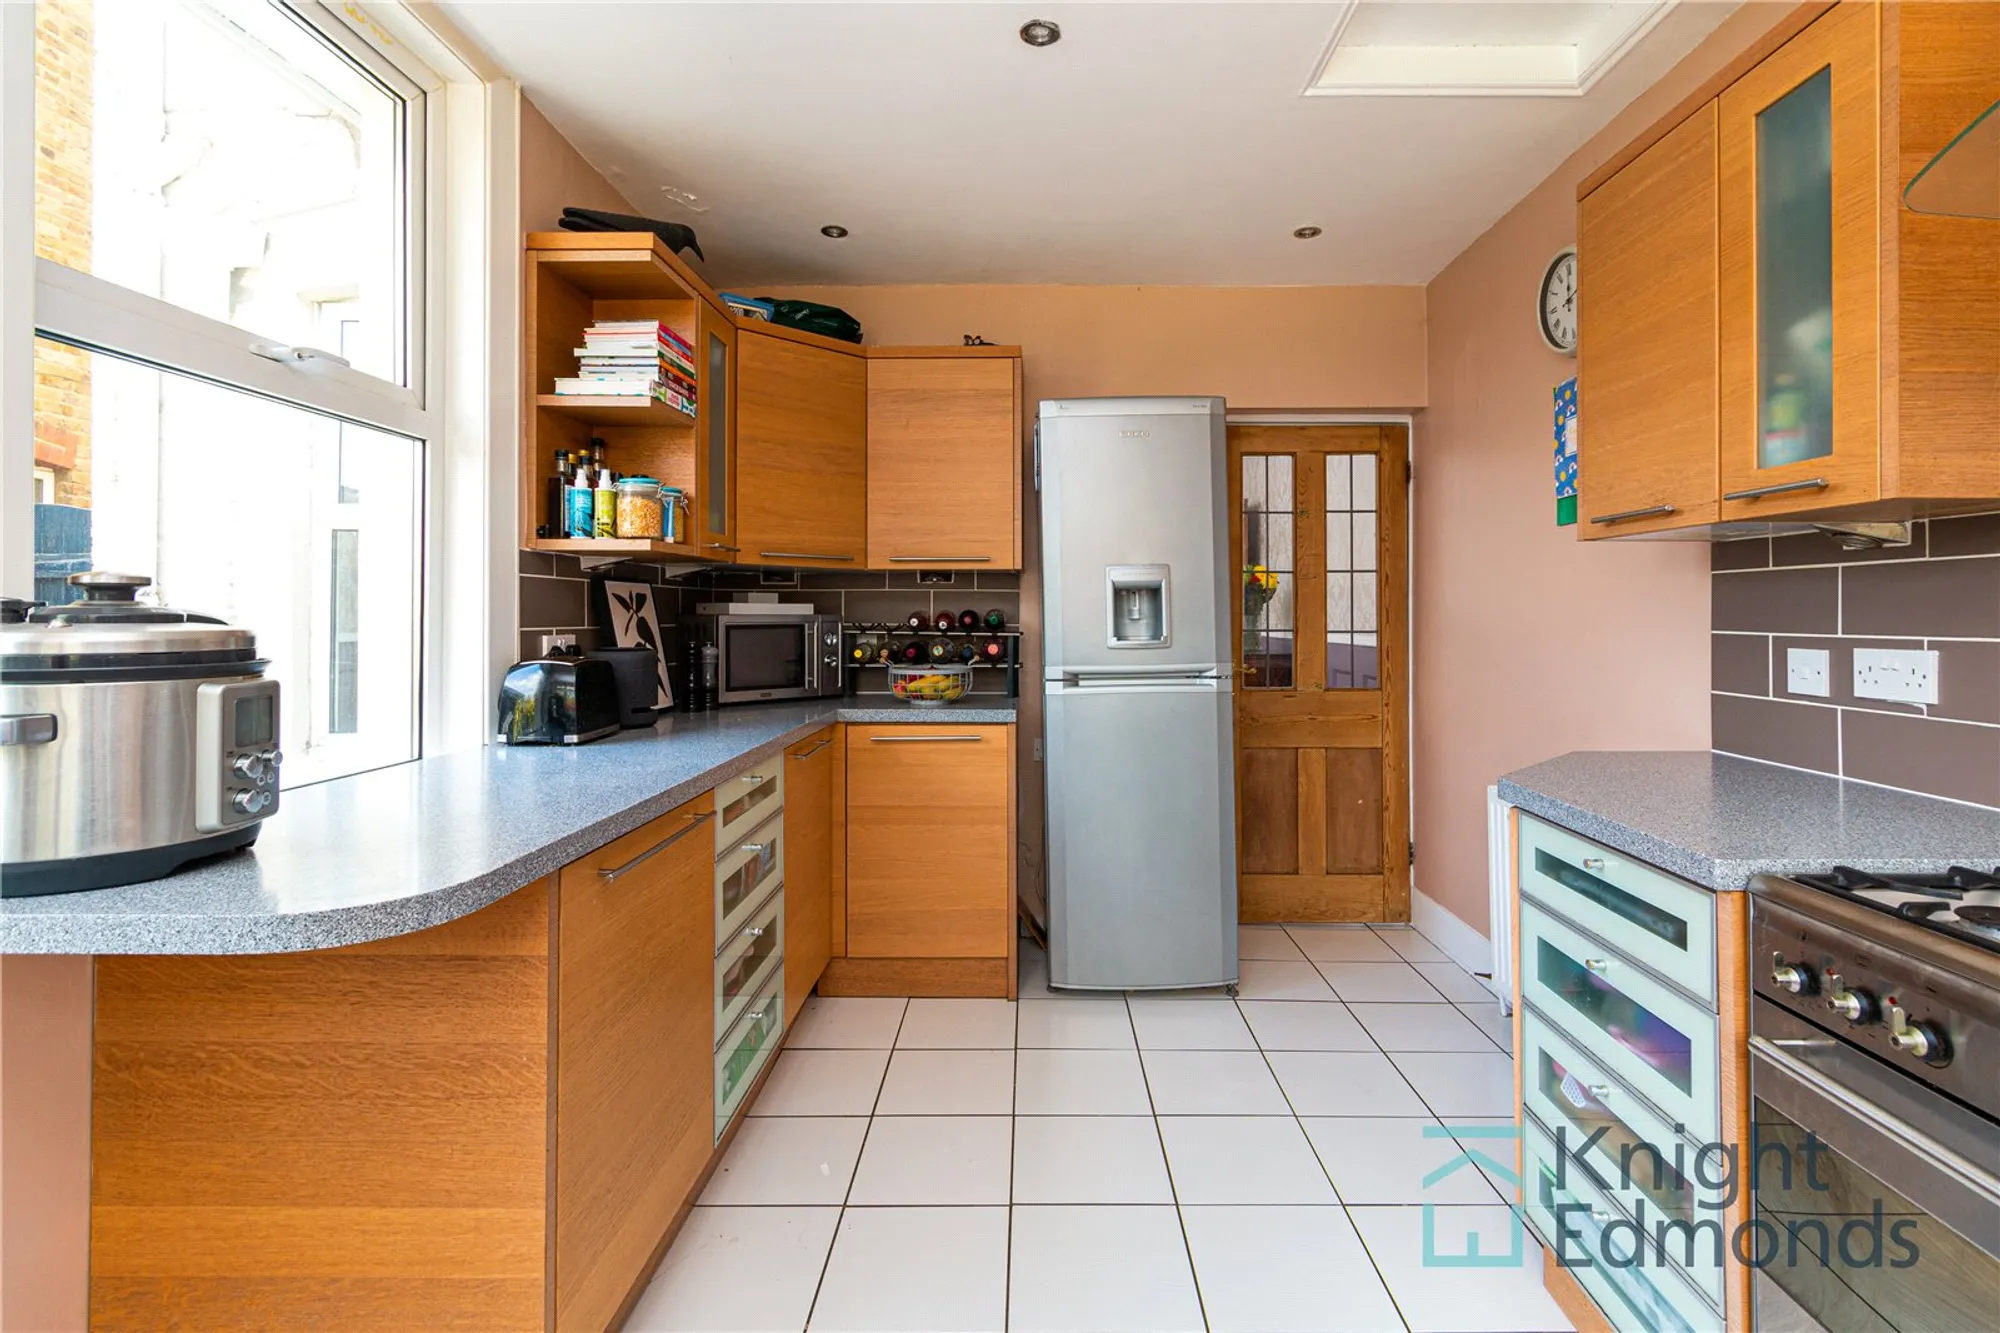 4 bed semi-detached house for sale in Cornwallis Road, Maidstone, ME16